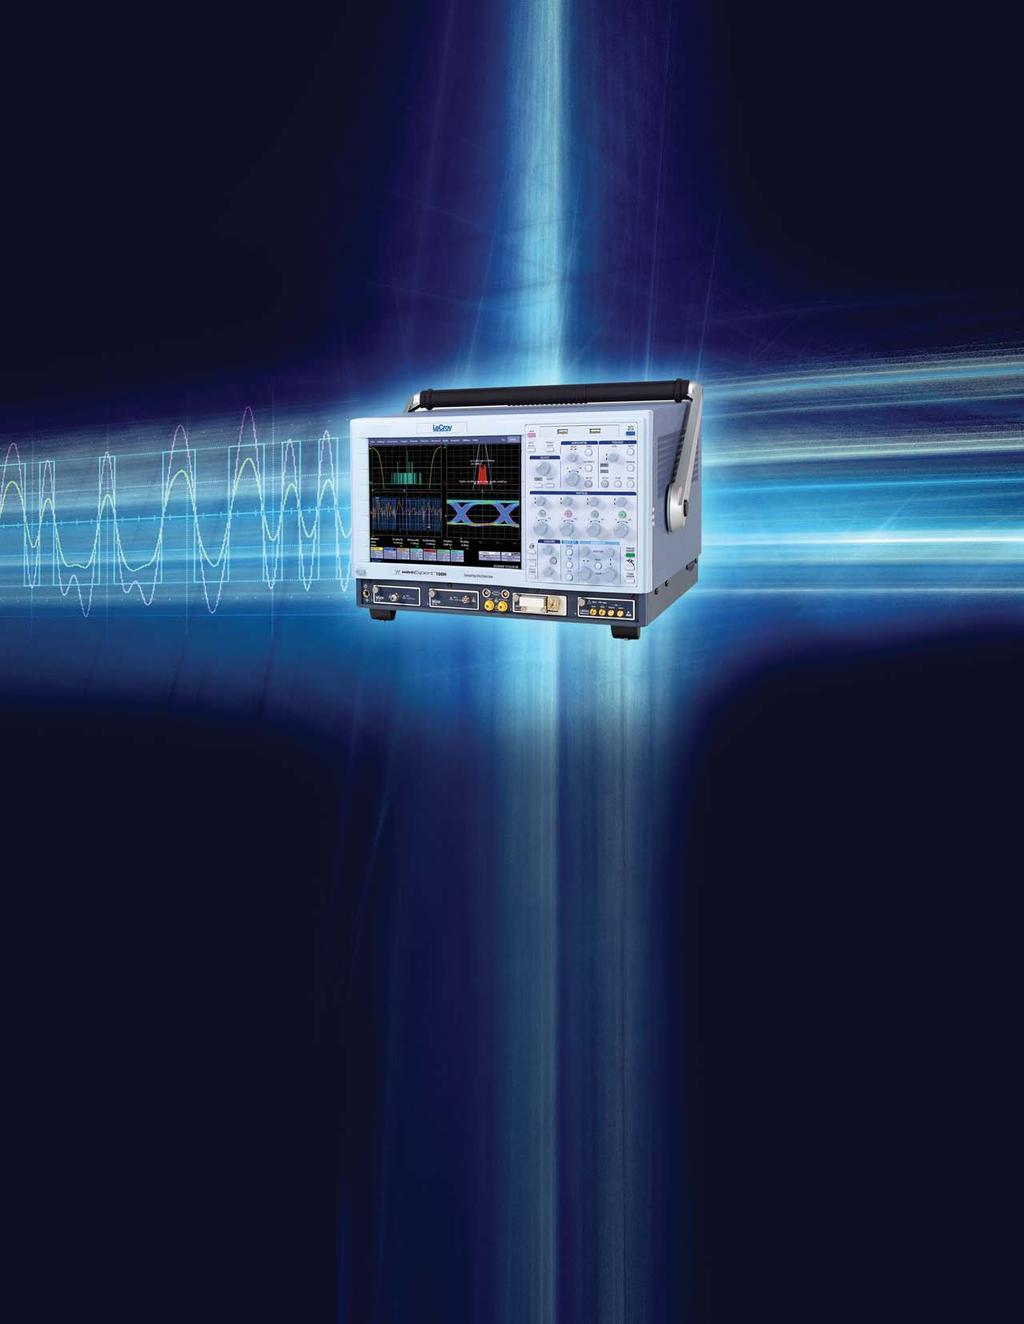 Up to 20 GHz TDR with Full S-parameter Measurements (Pgs 4-5) The